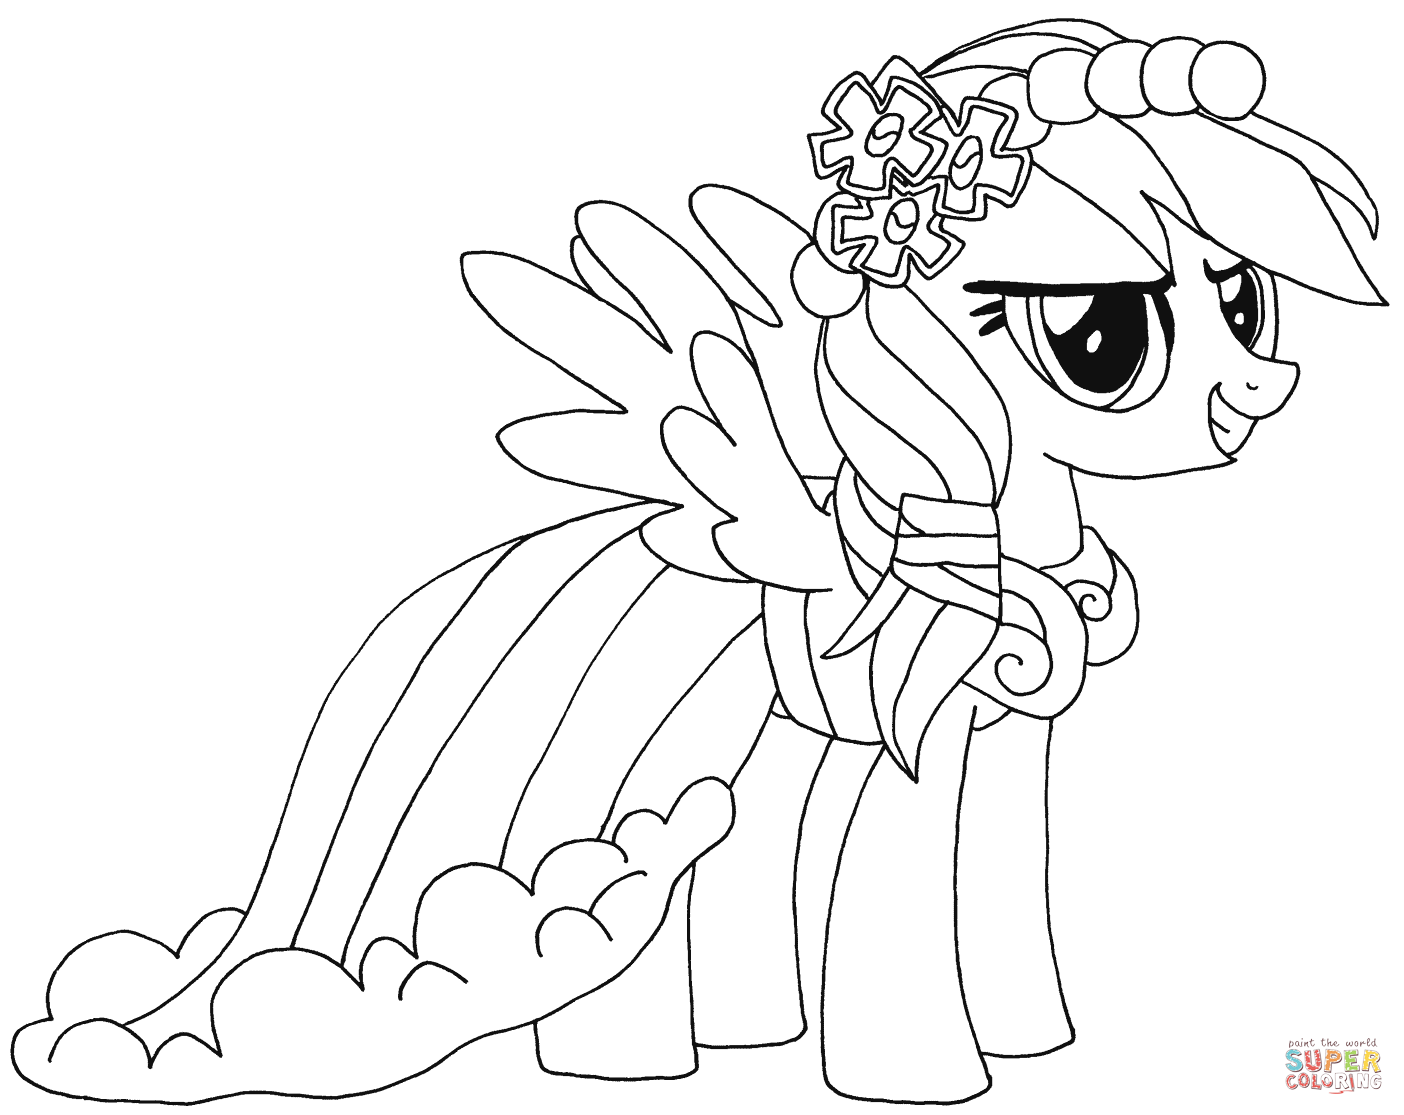 Rainbow dash coloring page free printable coloring pages